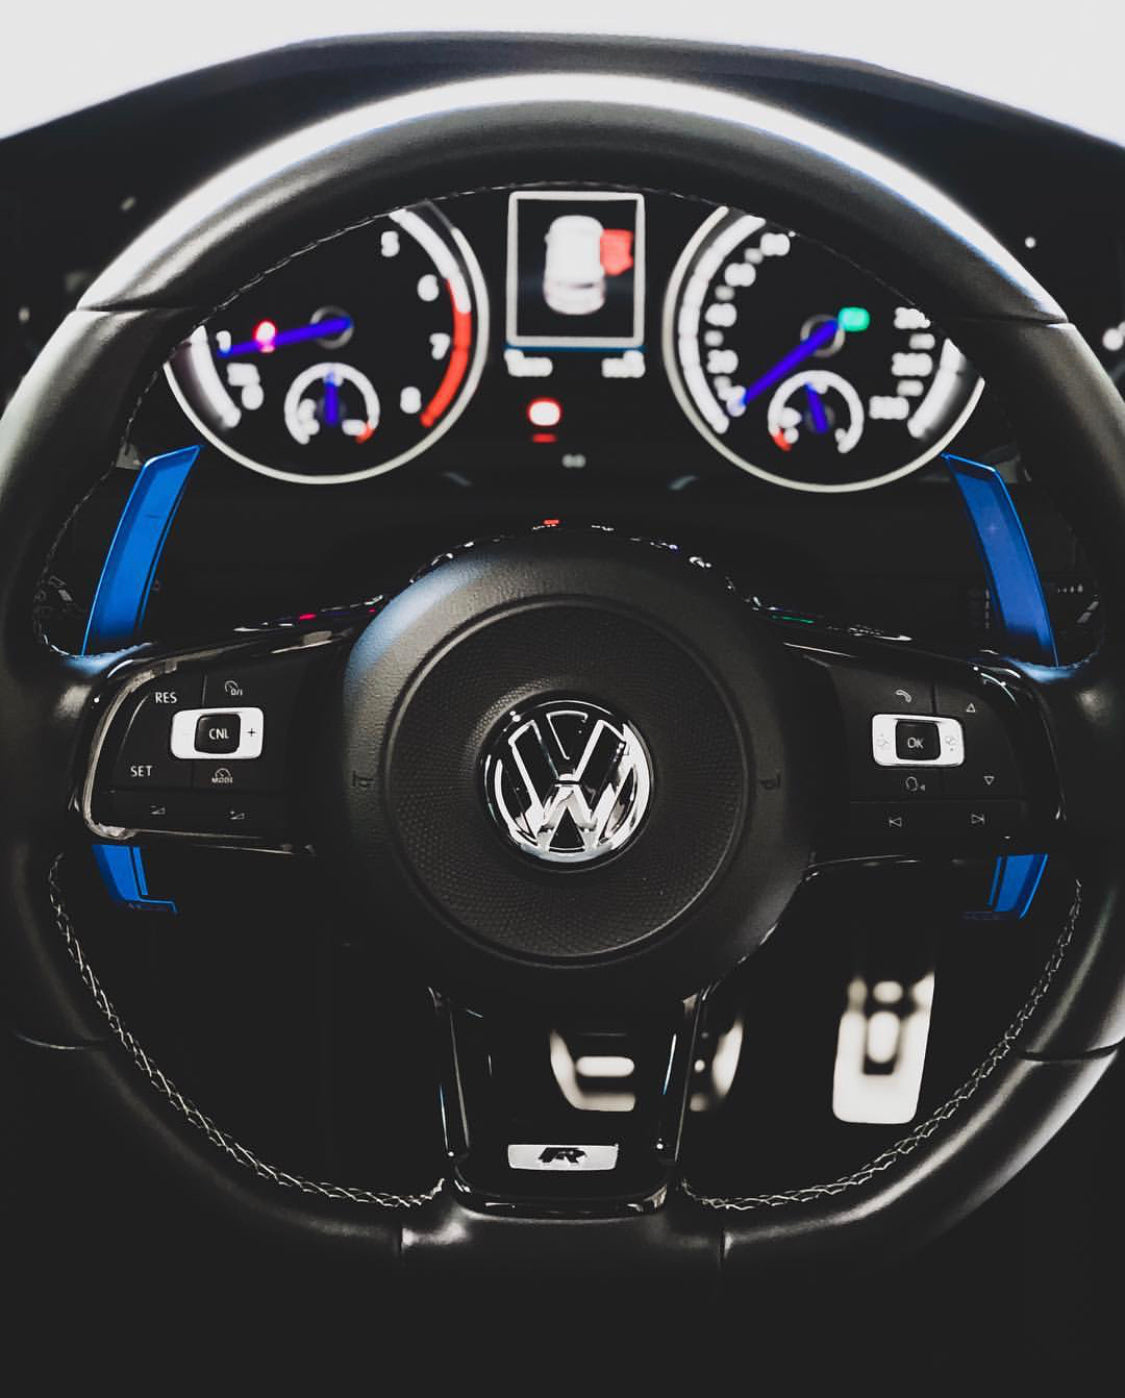 MODE Shift+ DSG Paddle Shifter (OEM Fit) for VW Golf R GTI MK7 MK7.5 / Polo  GTI 6C AW / Scirocco R FL / & R-Line Models